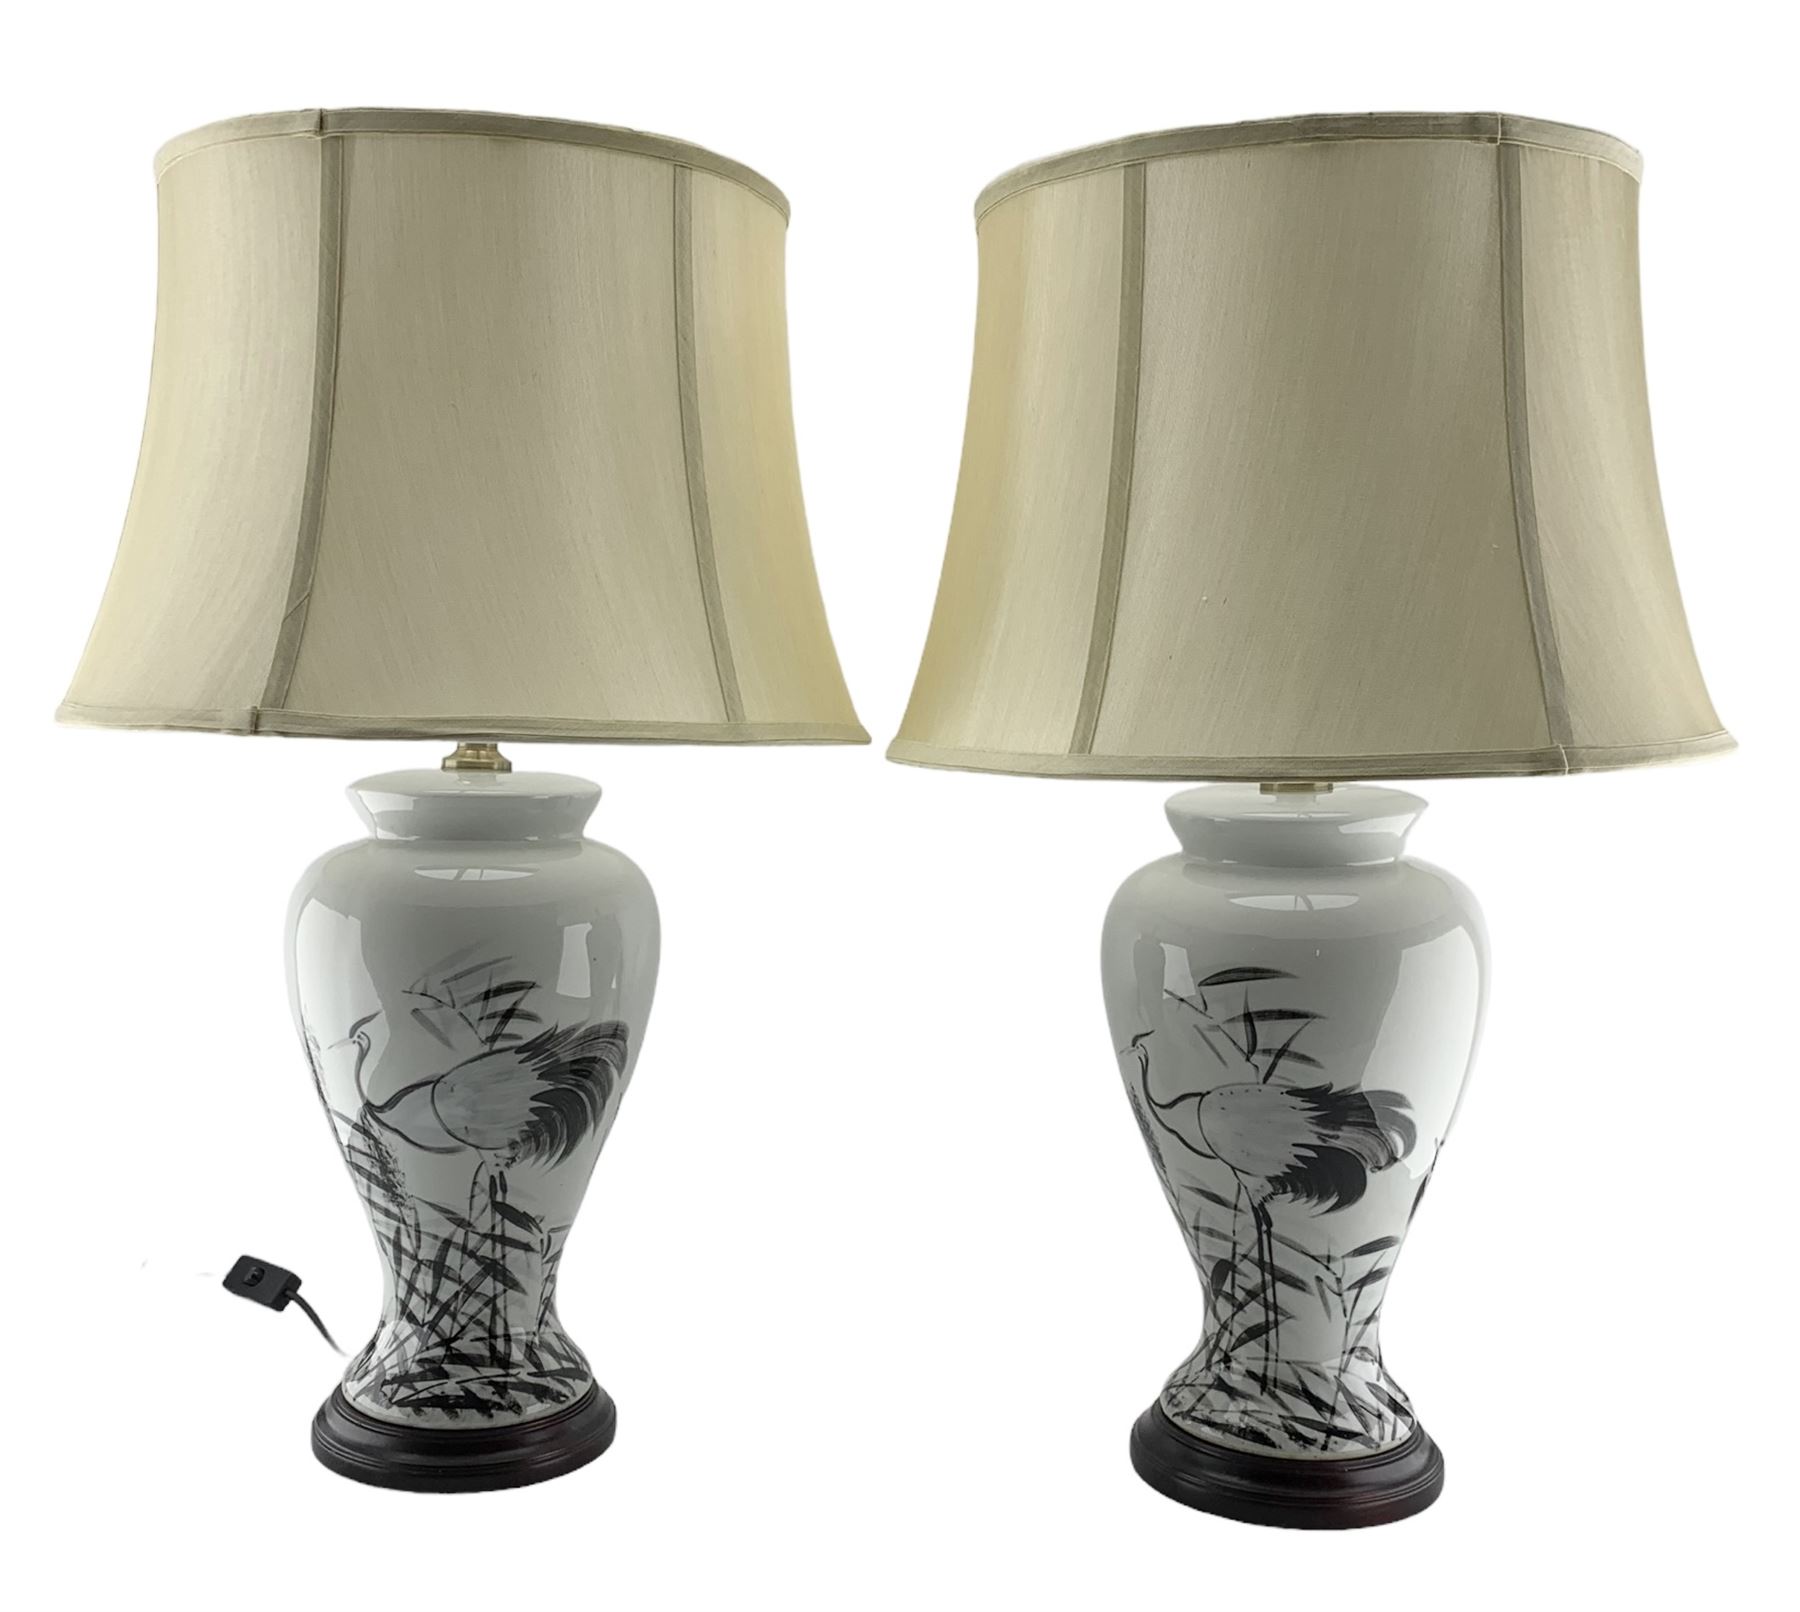 Pair of Chinese porcelain table lamps